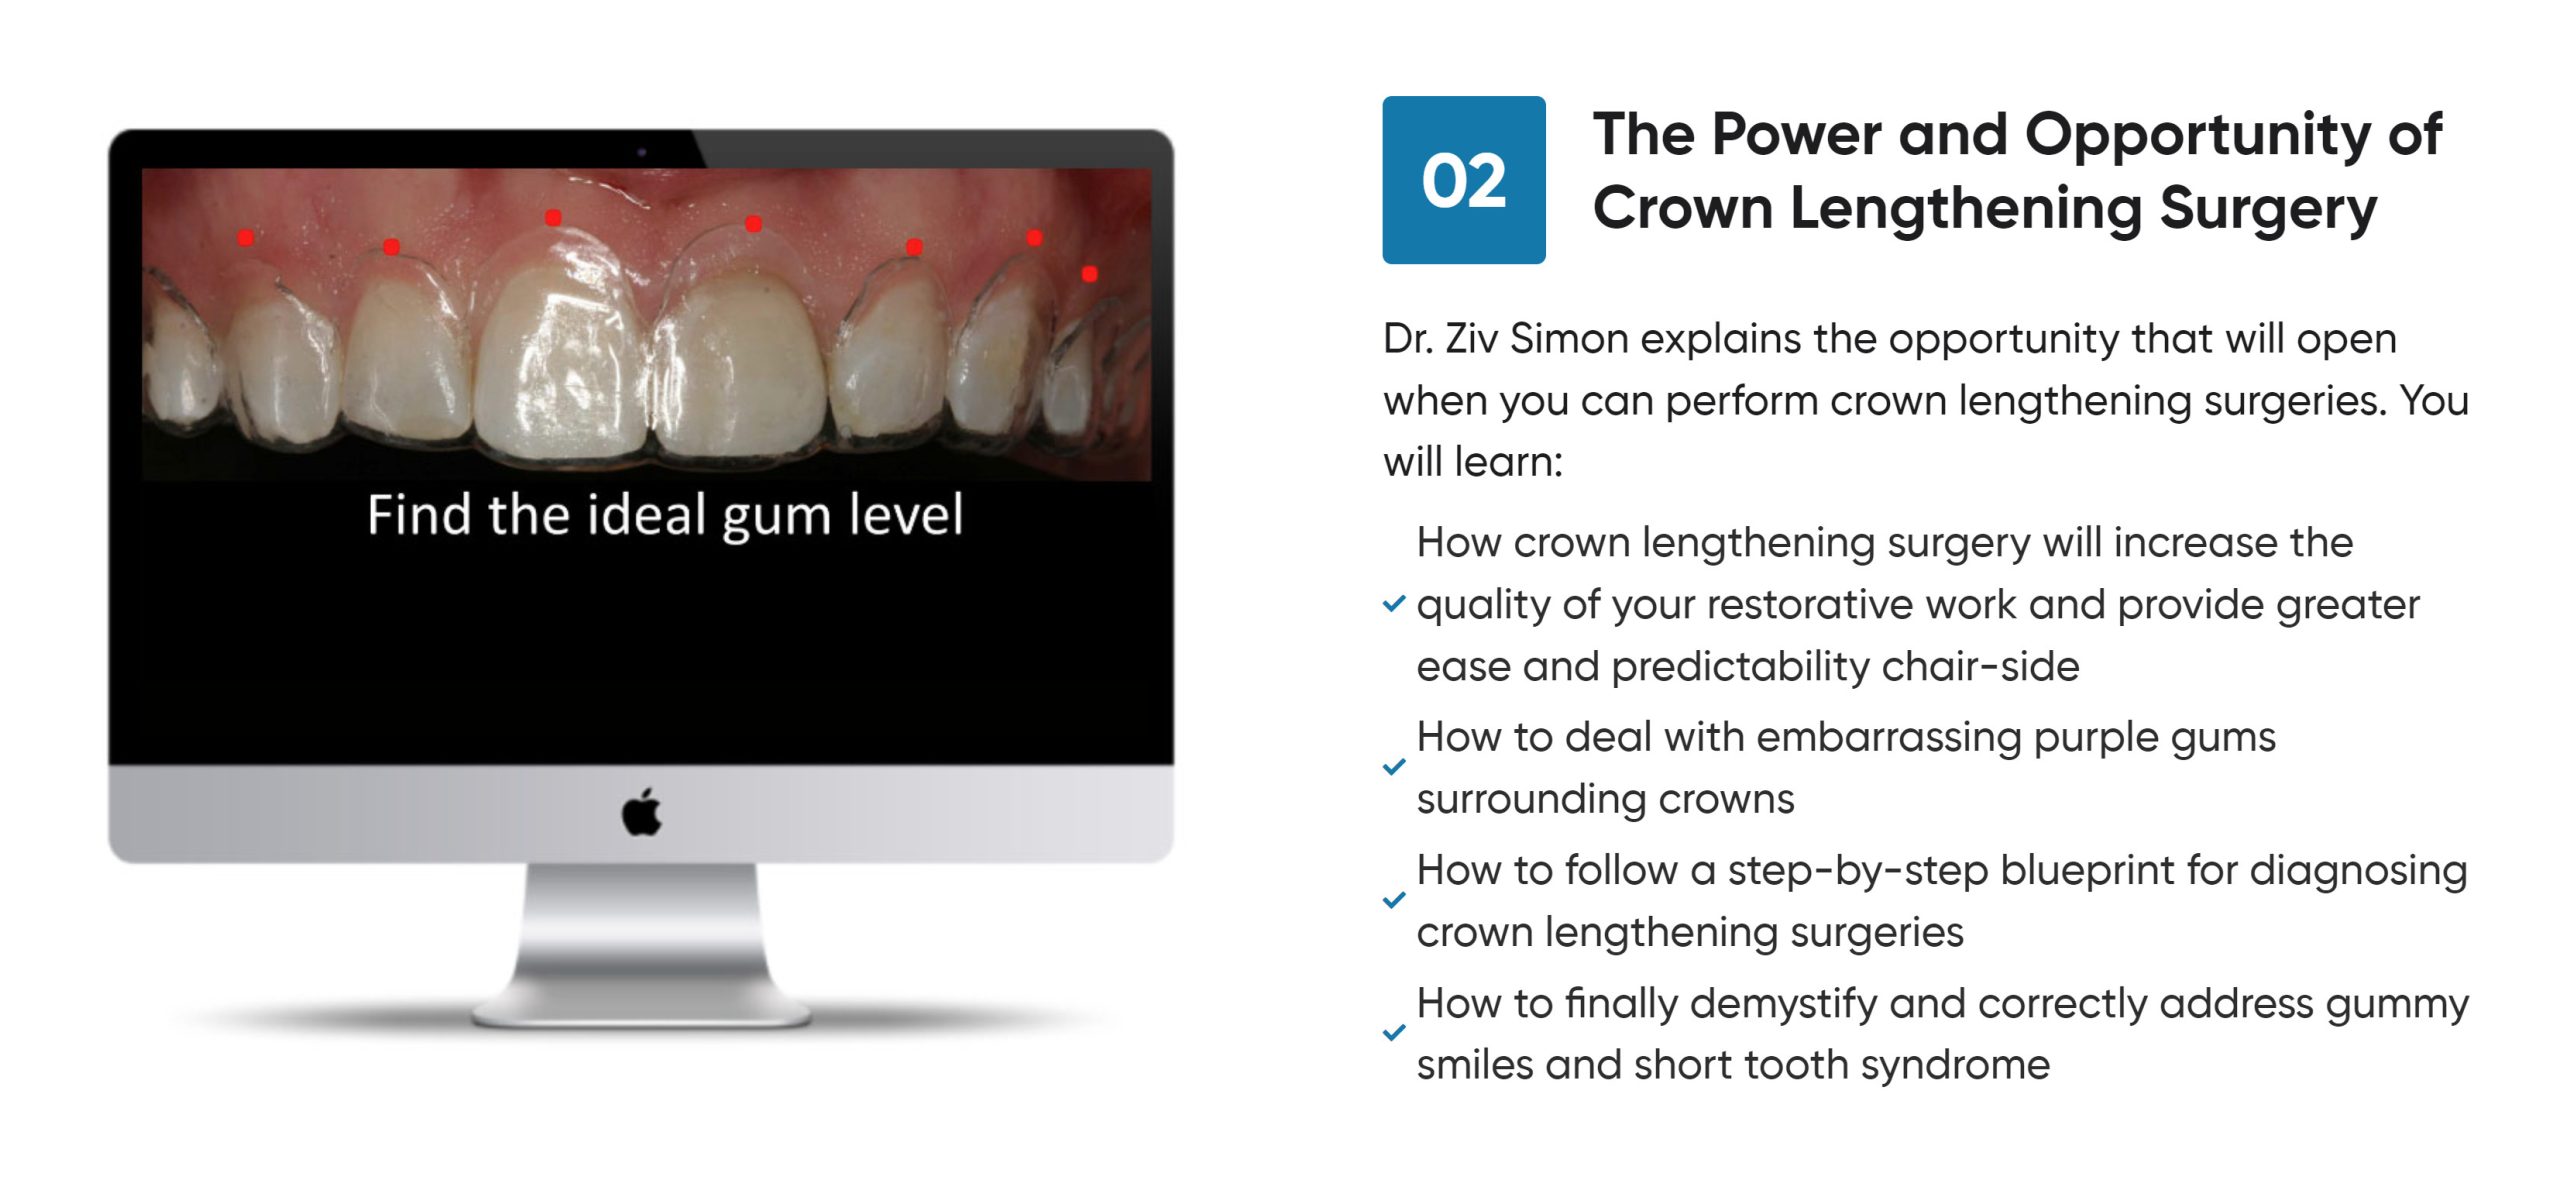 The Power and Opportunity of Crown Lengthening Surgery